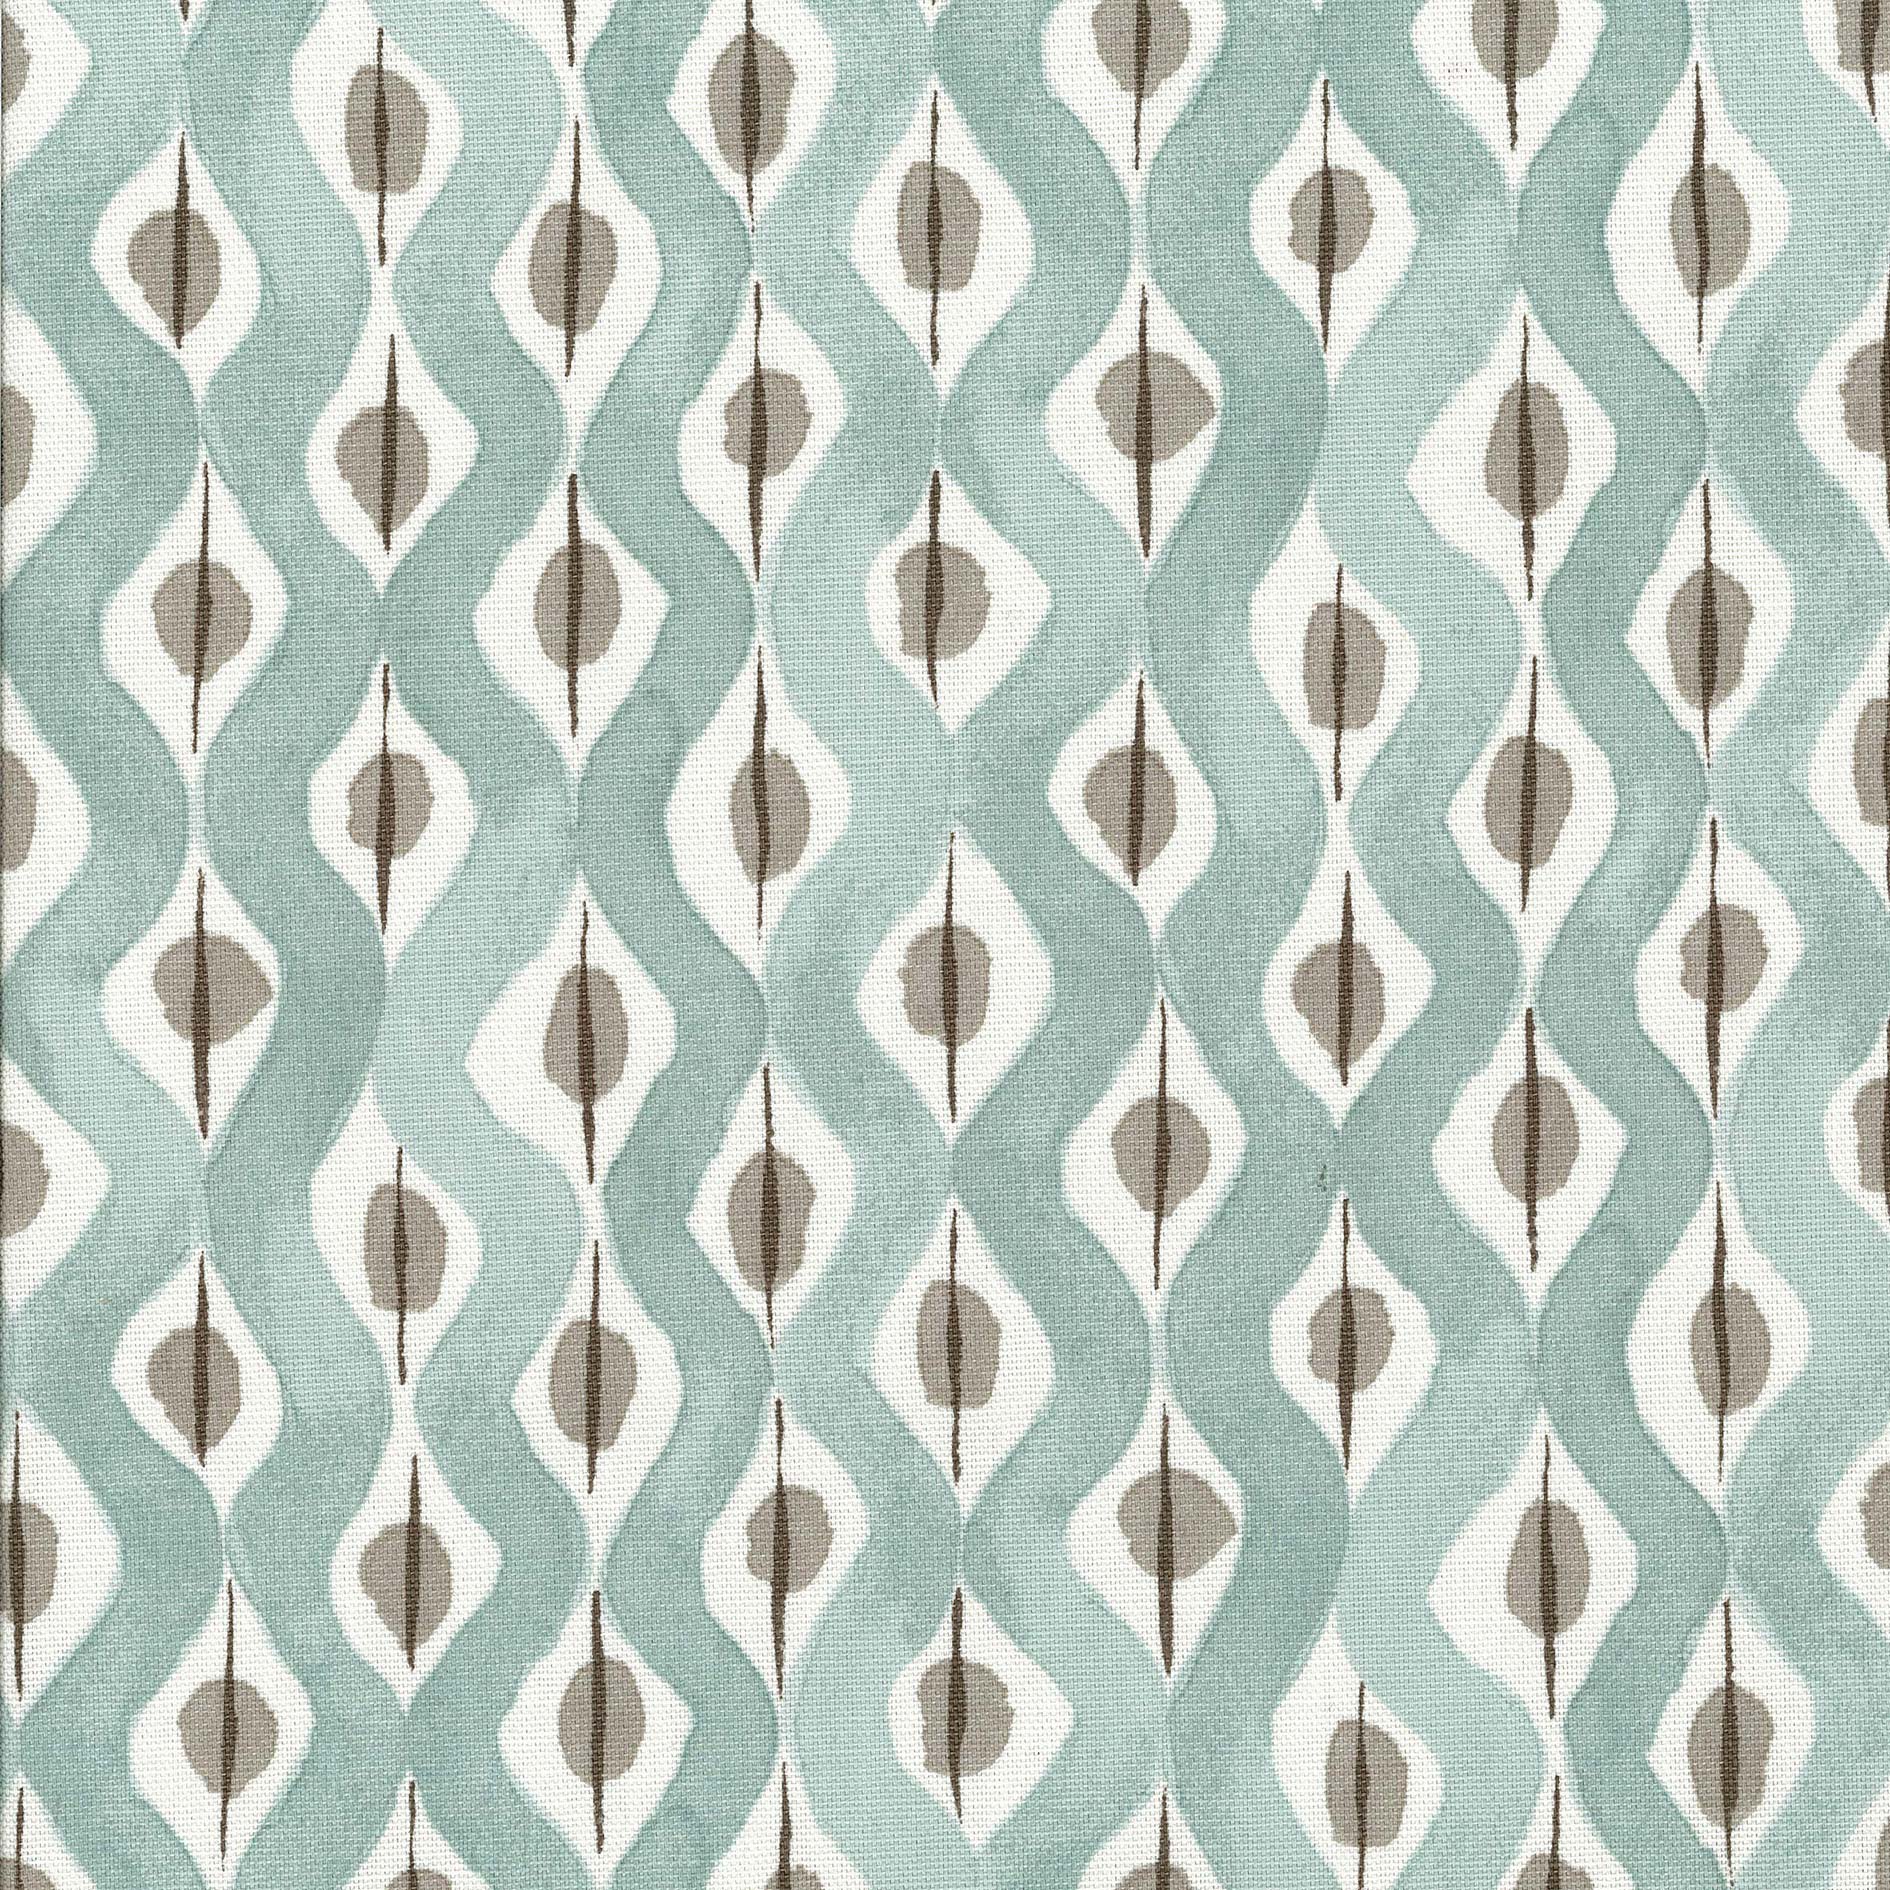 Nina Campbell Fabric - Les Rêves Beau Rivage Duck Egg/Taupe NCF4295-01